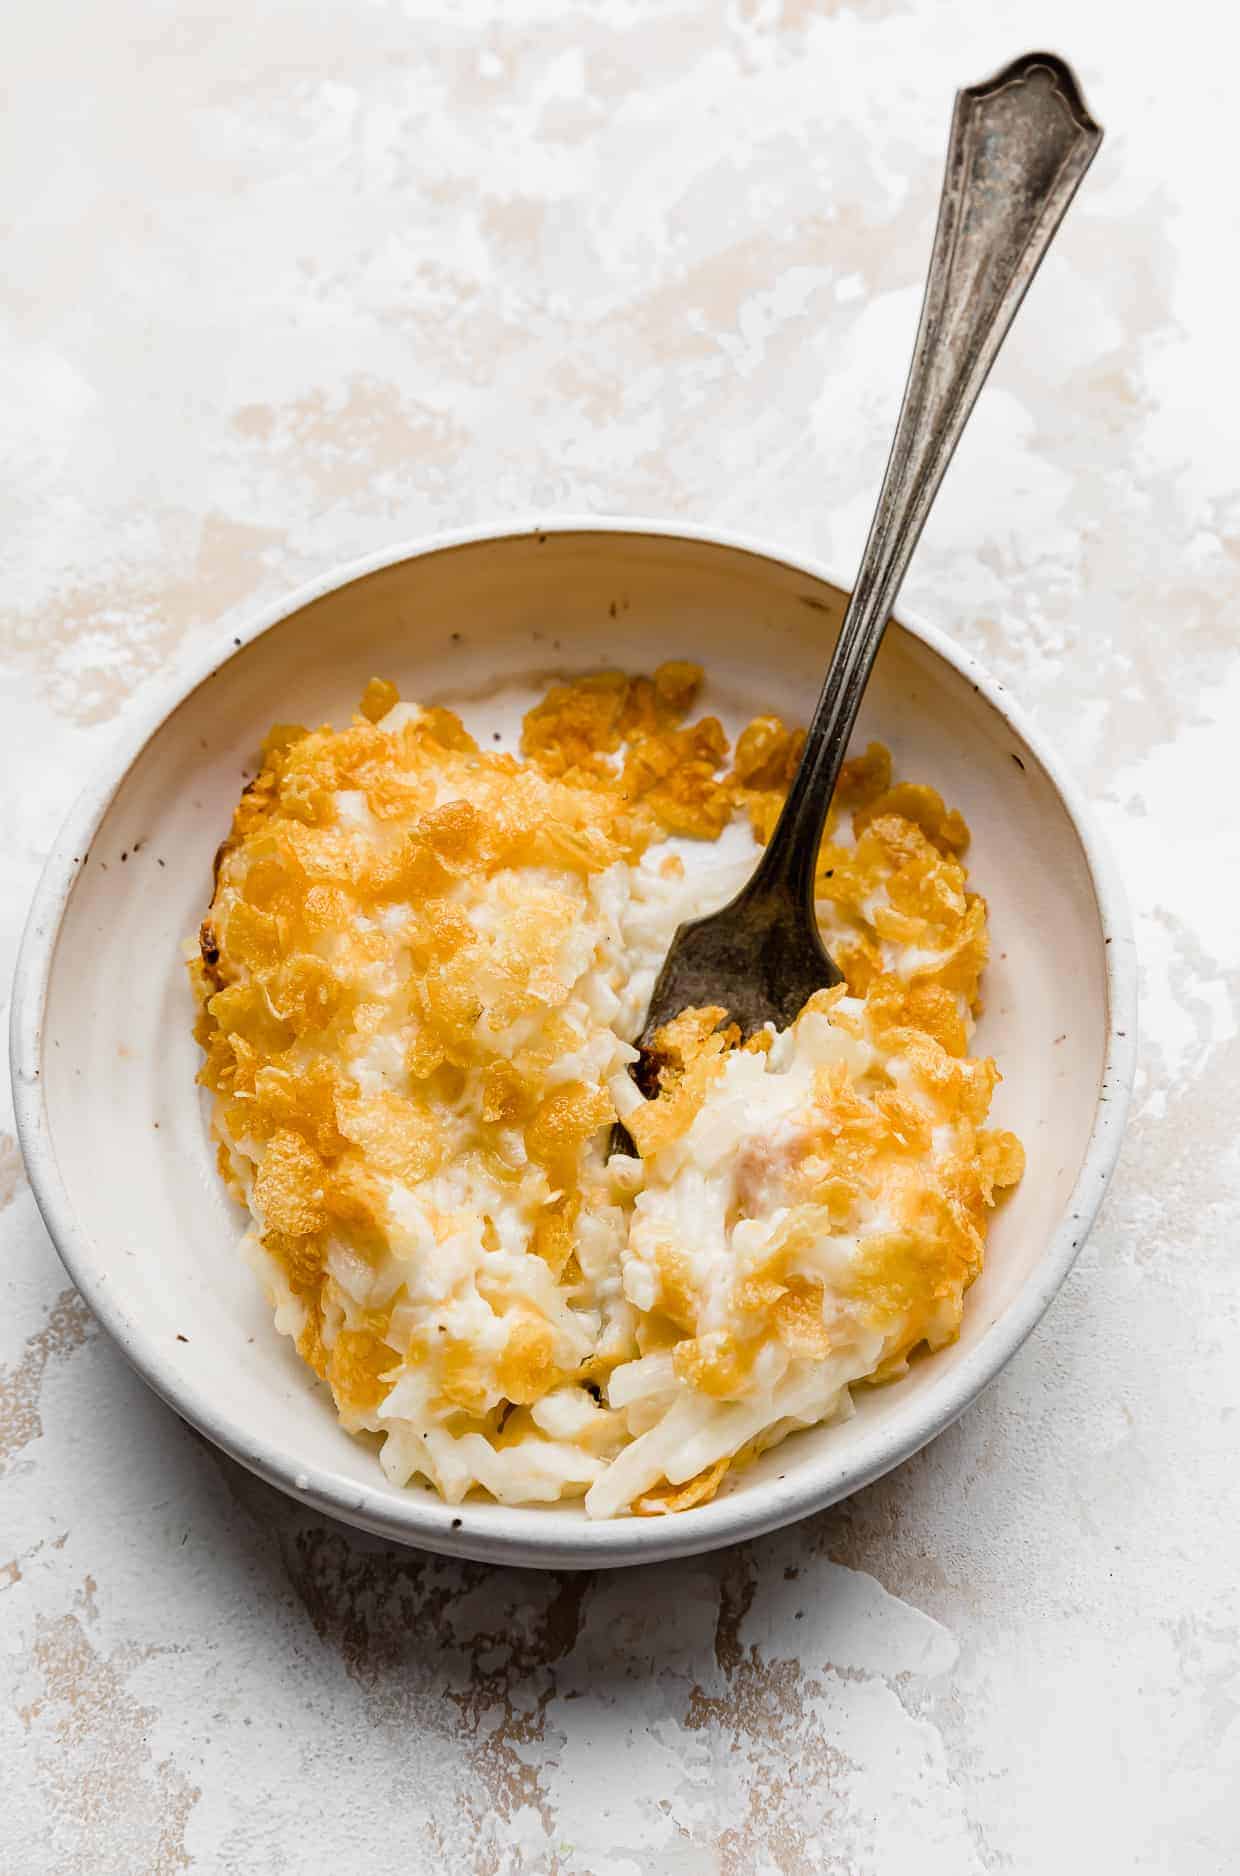 A serving of funeral potatoes on a white plate with a fork, against a white background.